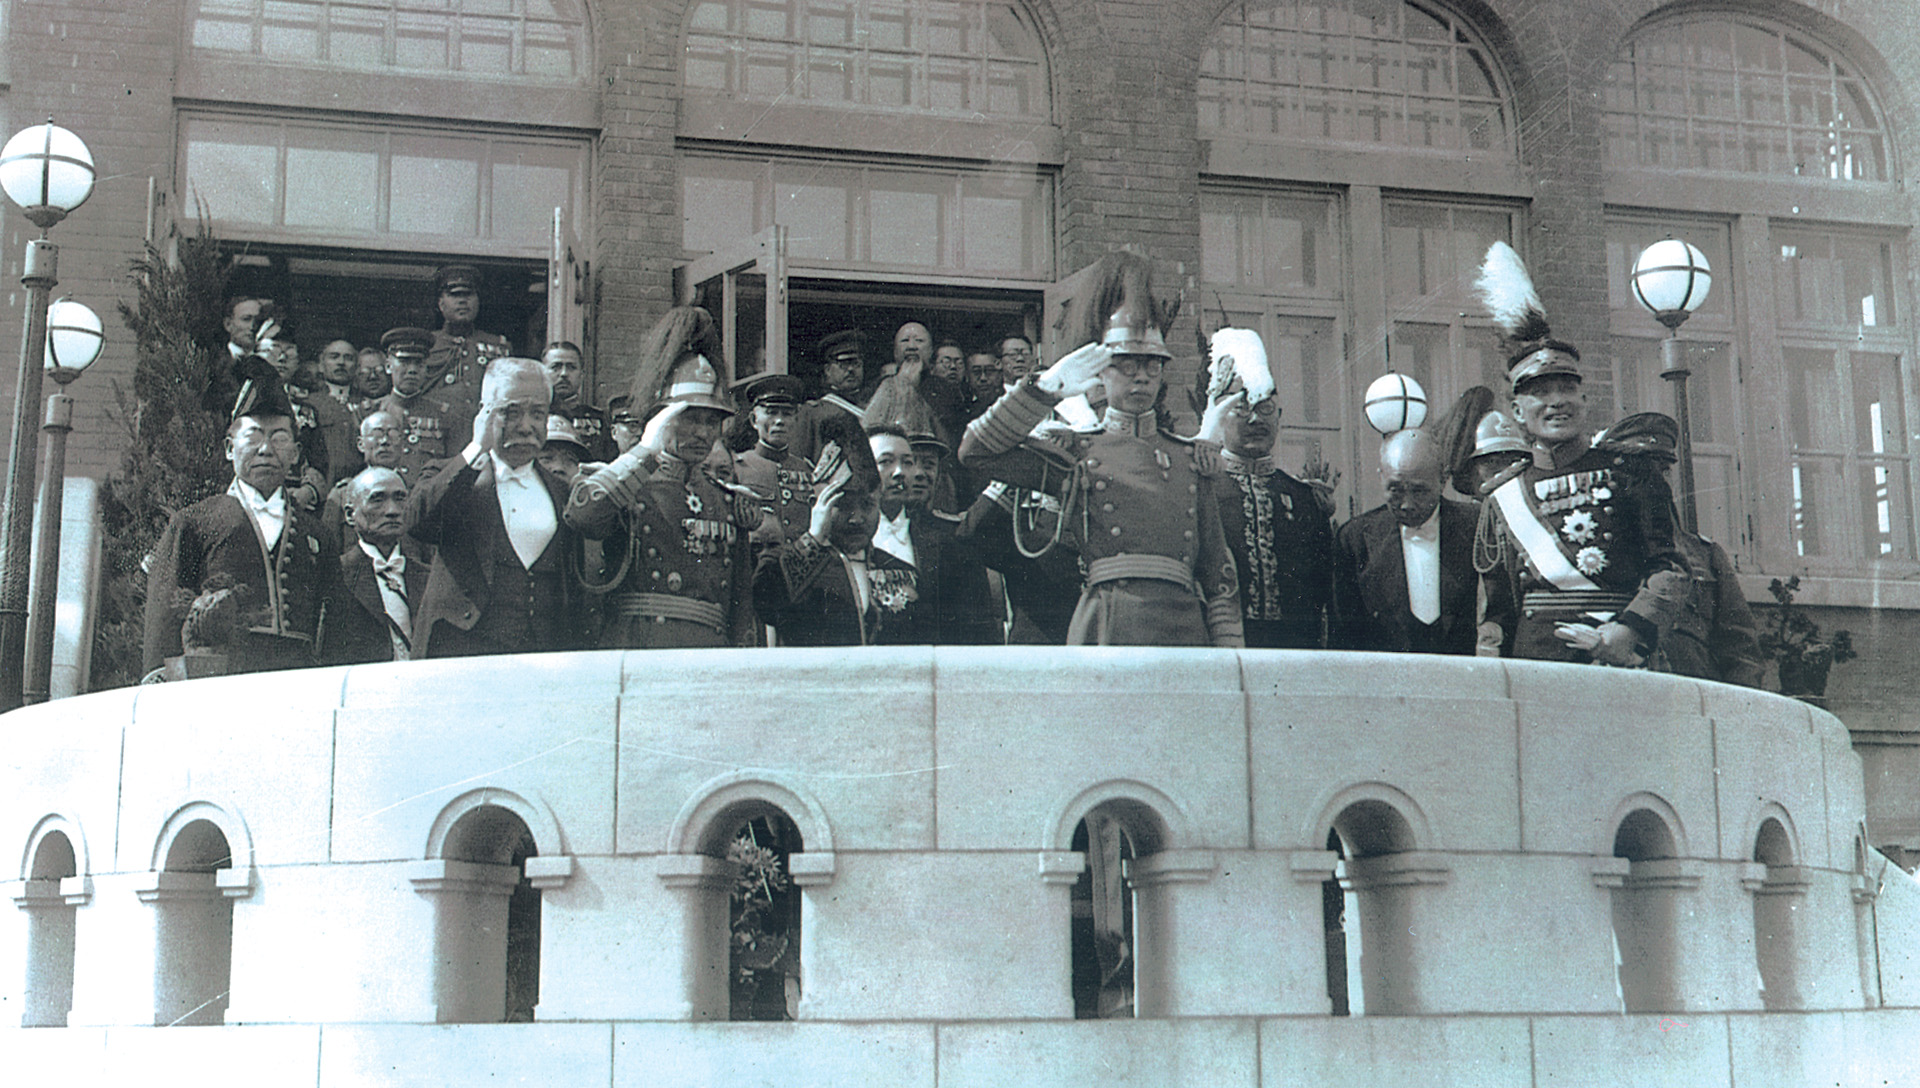 Pu Yi, wearing glasses and a plumed hat, salutes the crowd at the ceremony proclaiming him emperor of the Japanese puppet state of Manchukuo.